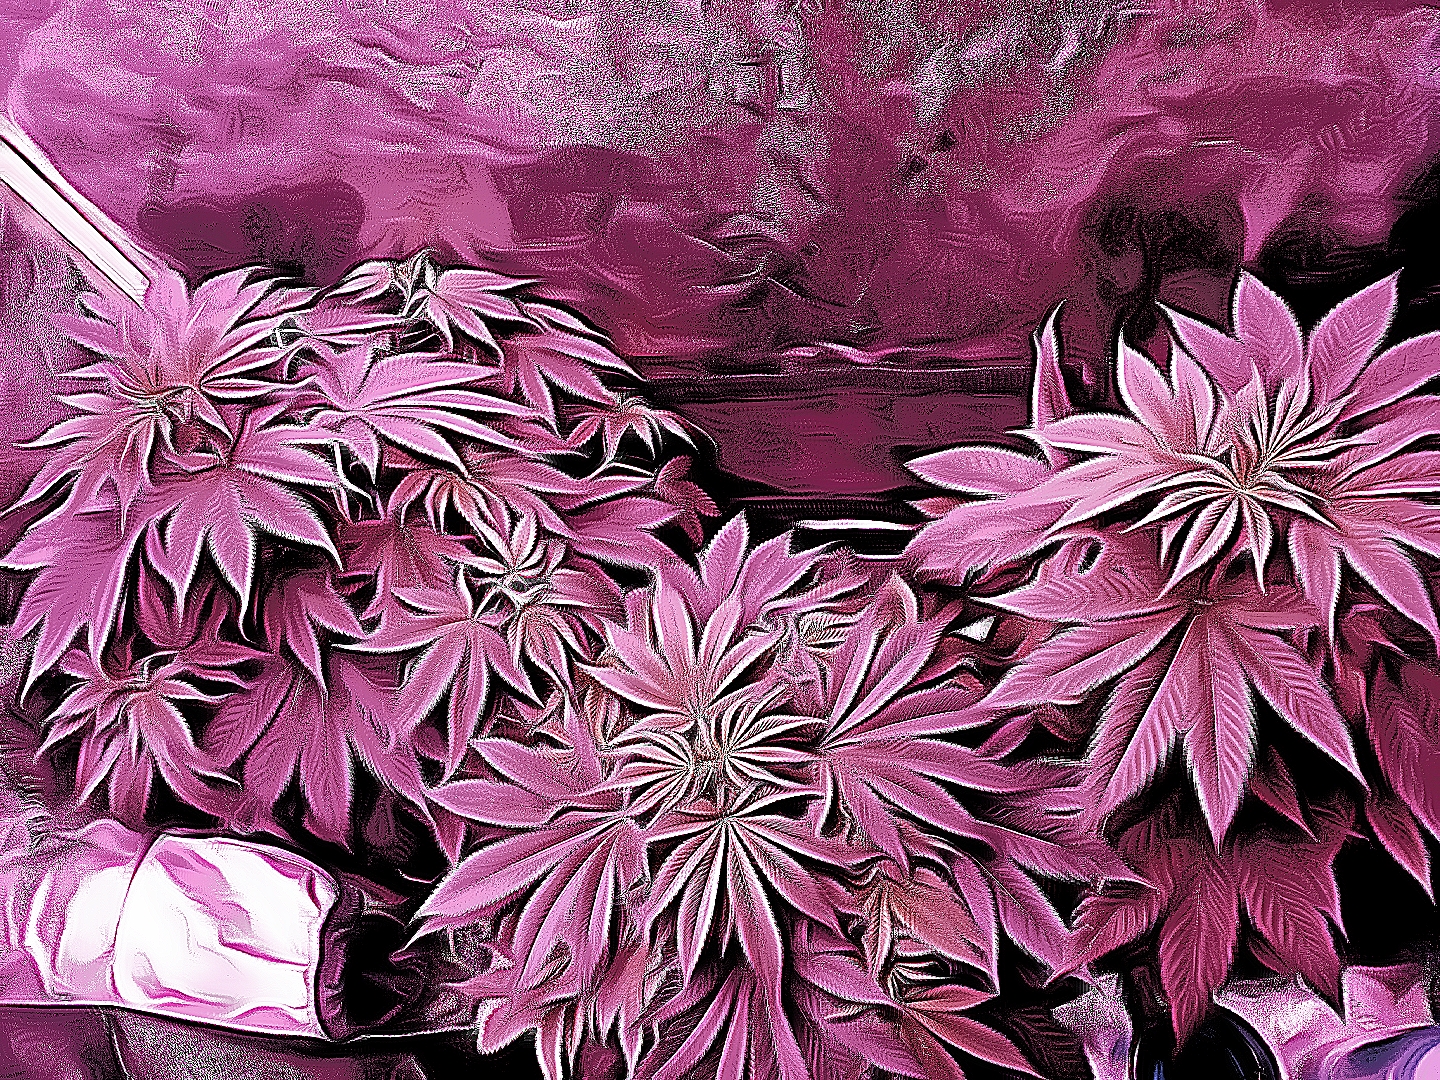 Edited photograph of cannabis plants during vegetation stage